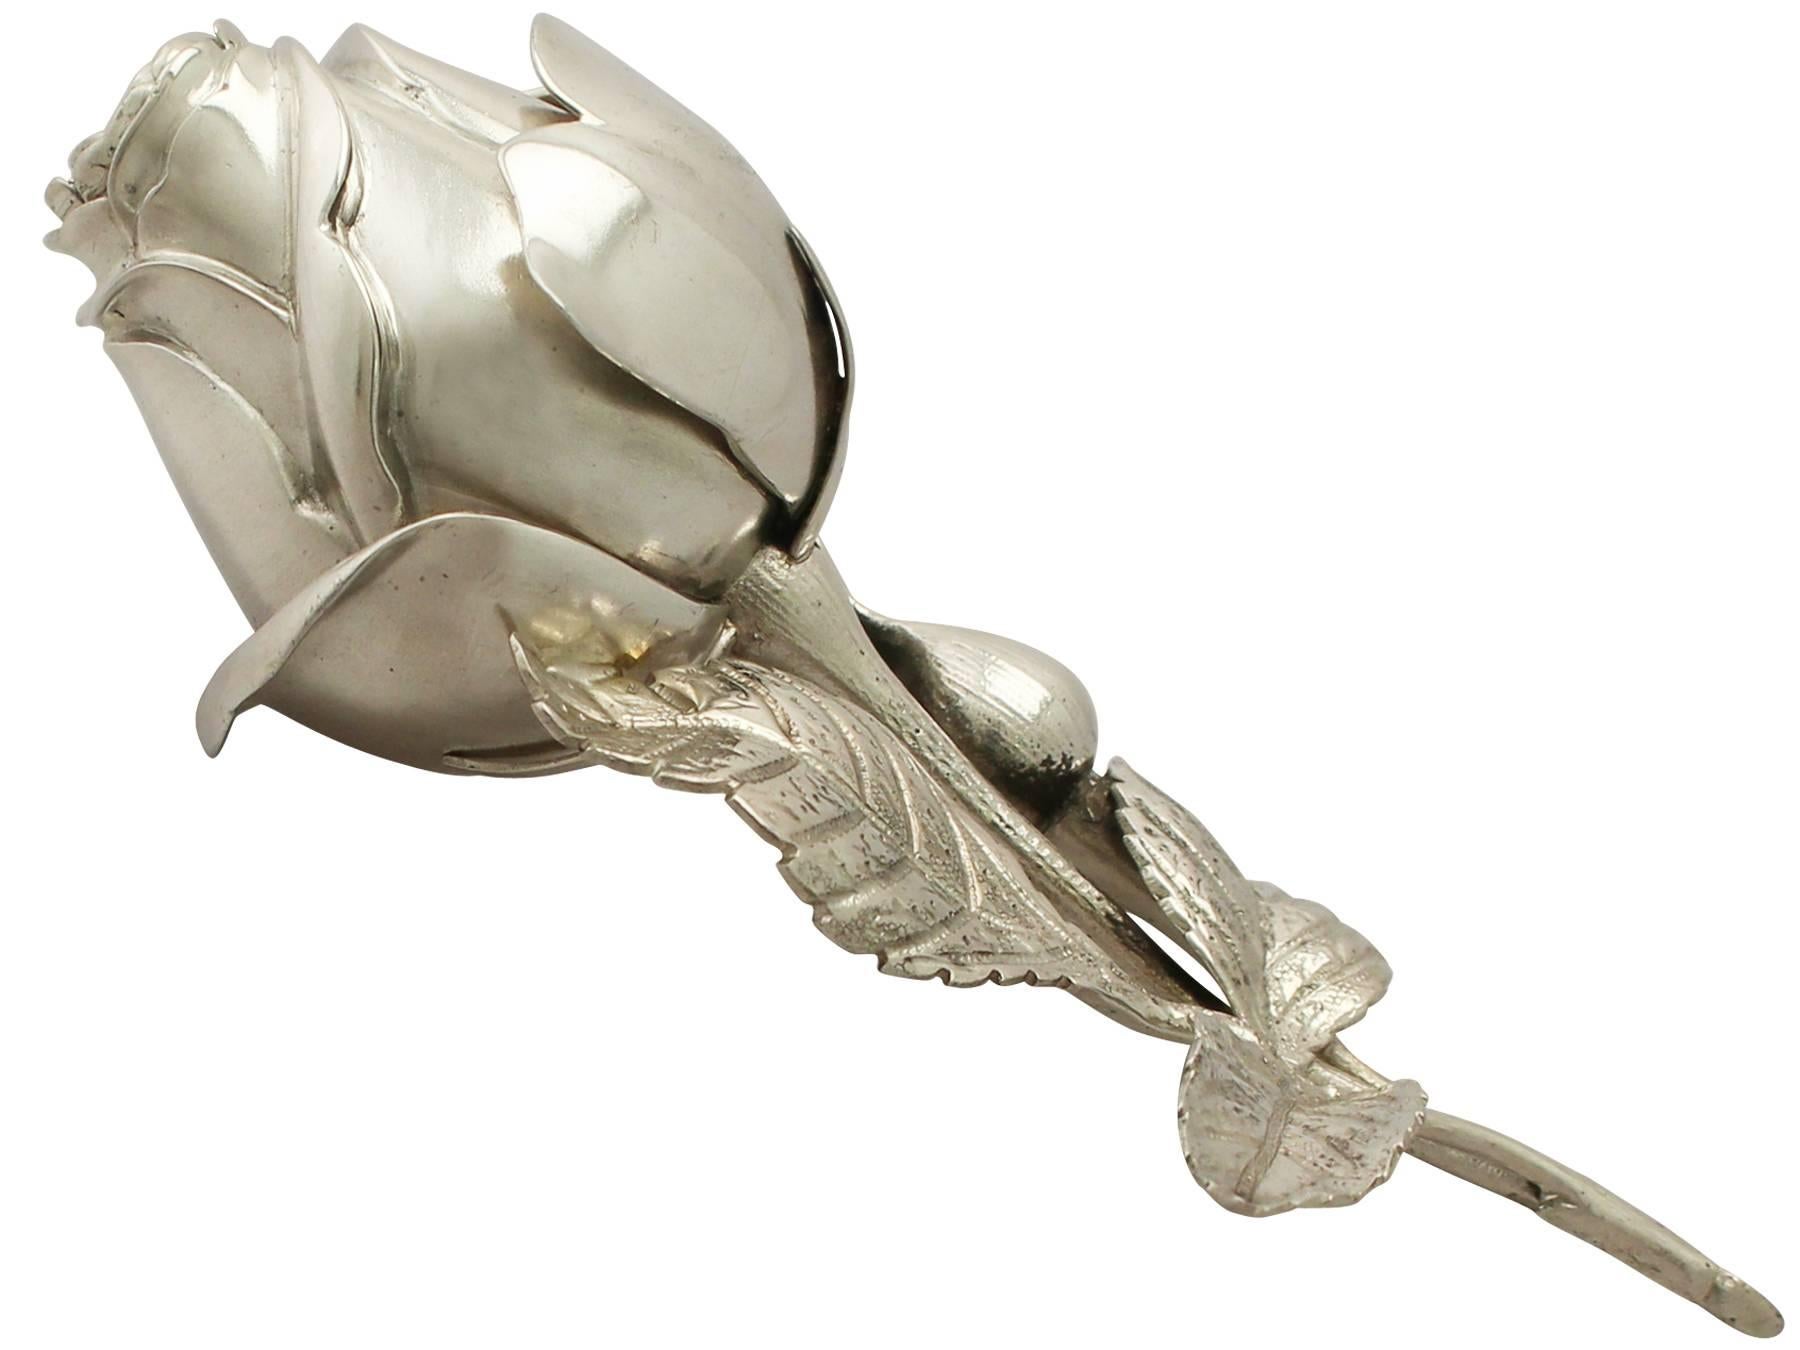 A magnificent, fine and impressive, unusual antique Victorian sterling silver flower vinaigrette or pomander; an addition to our ornamental silver collection.

This magnificent antique Victorian cast sterling silver pomander has been realistically